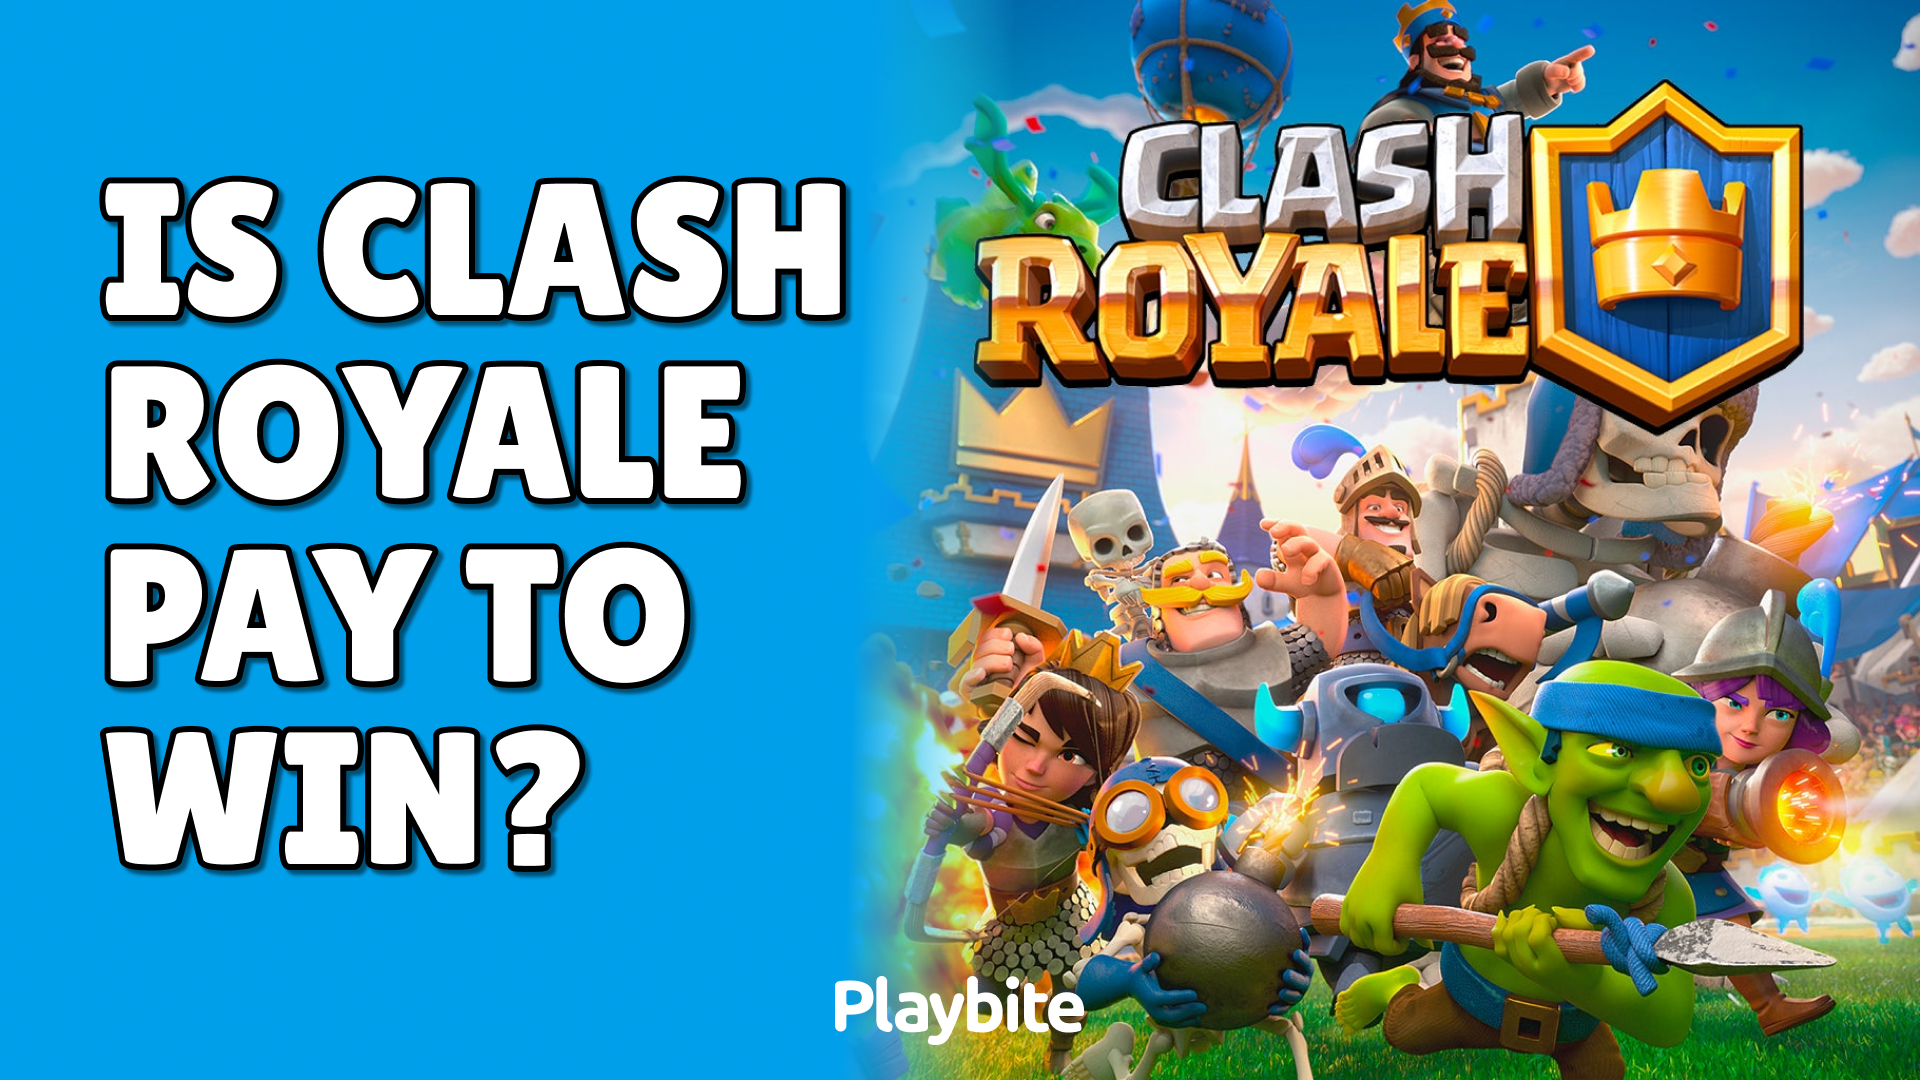 Is Clash Royale Pay To Win?